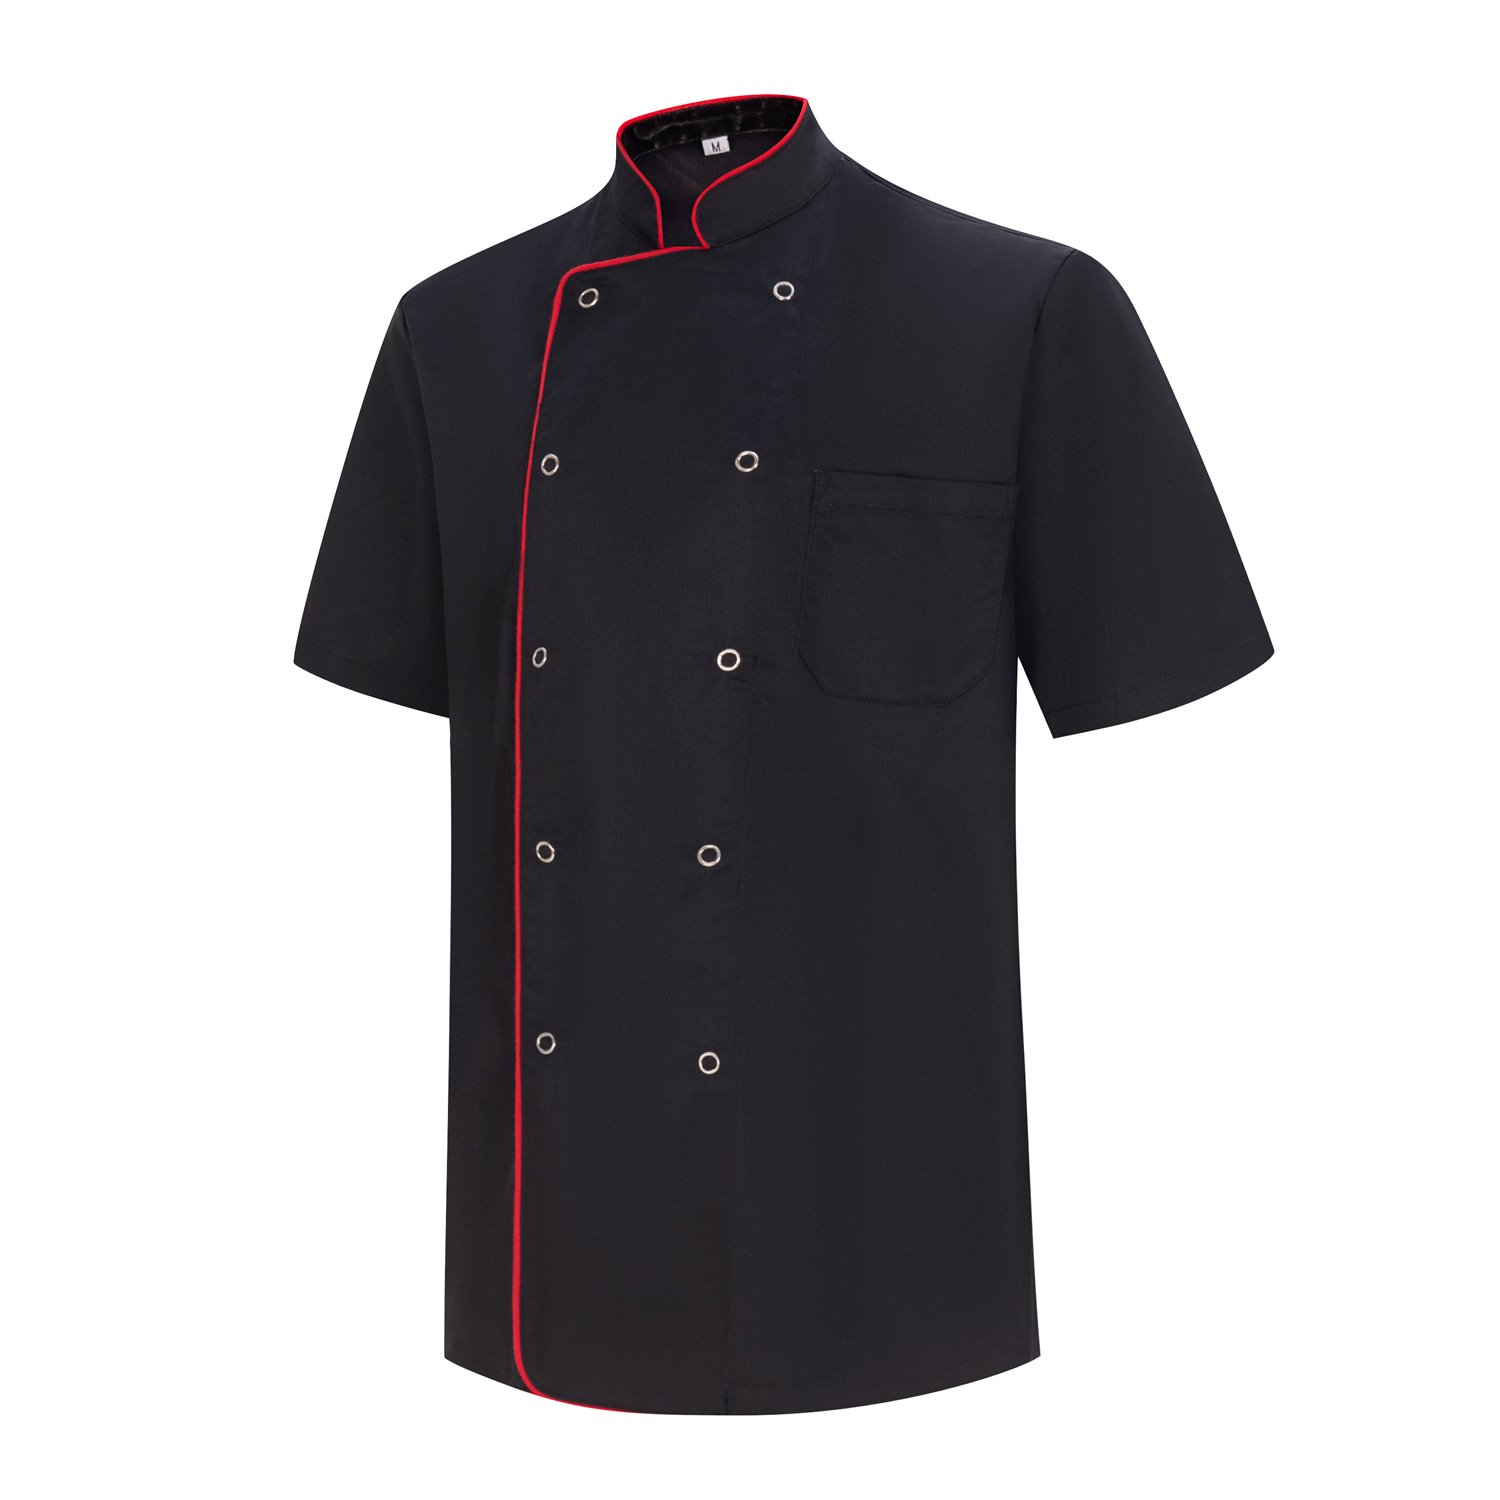 CHEF JACKETS MAN LONG SLEEVES - Ref.8501